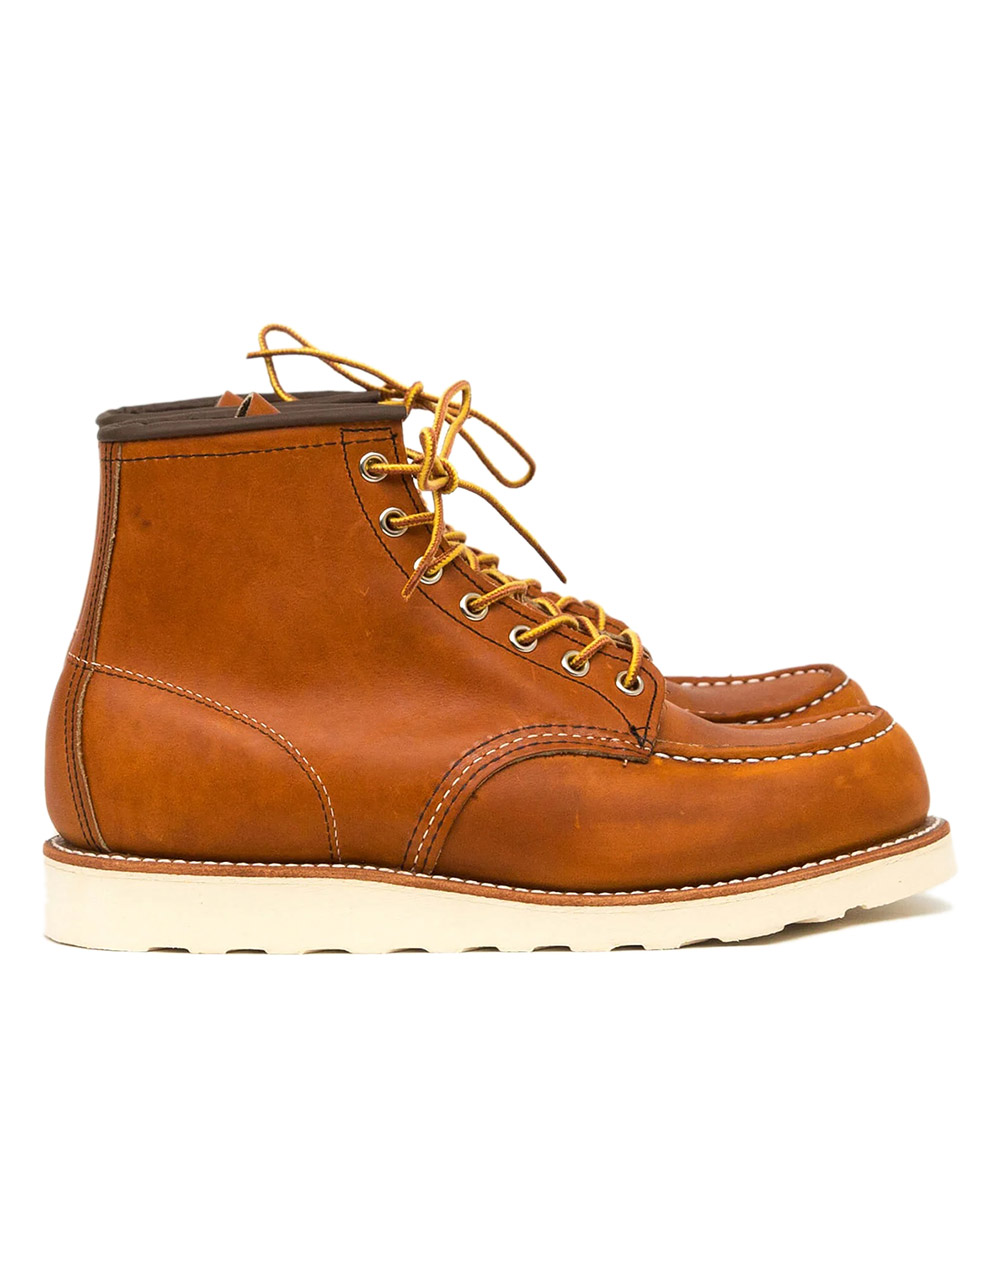 Red Wing Shoes – Classic Moc Toe